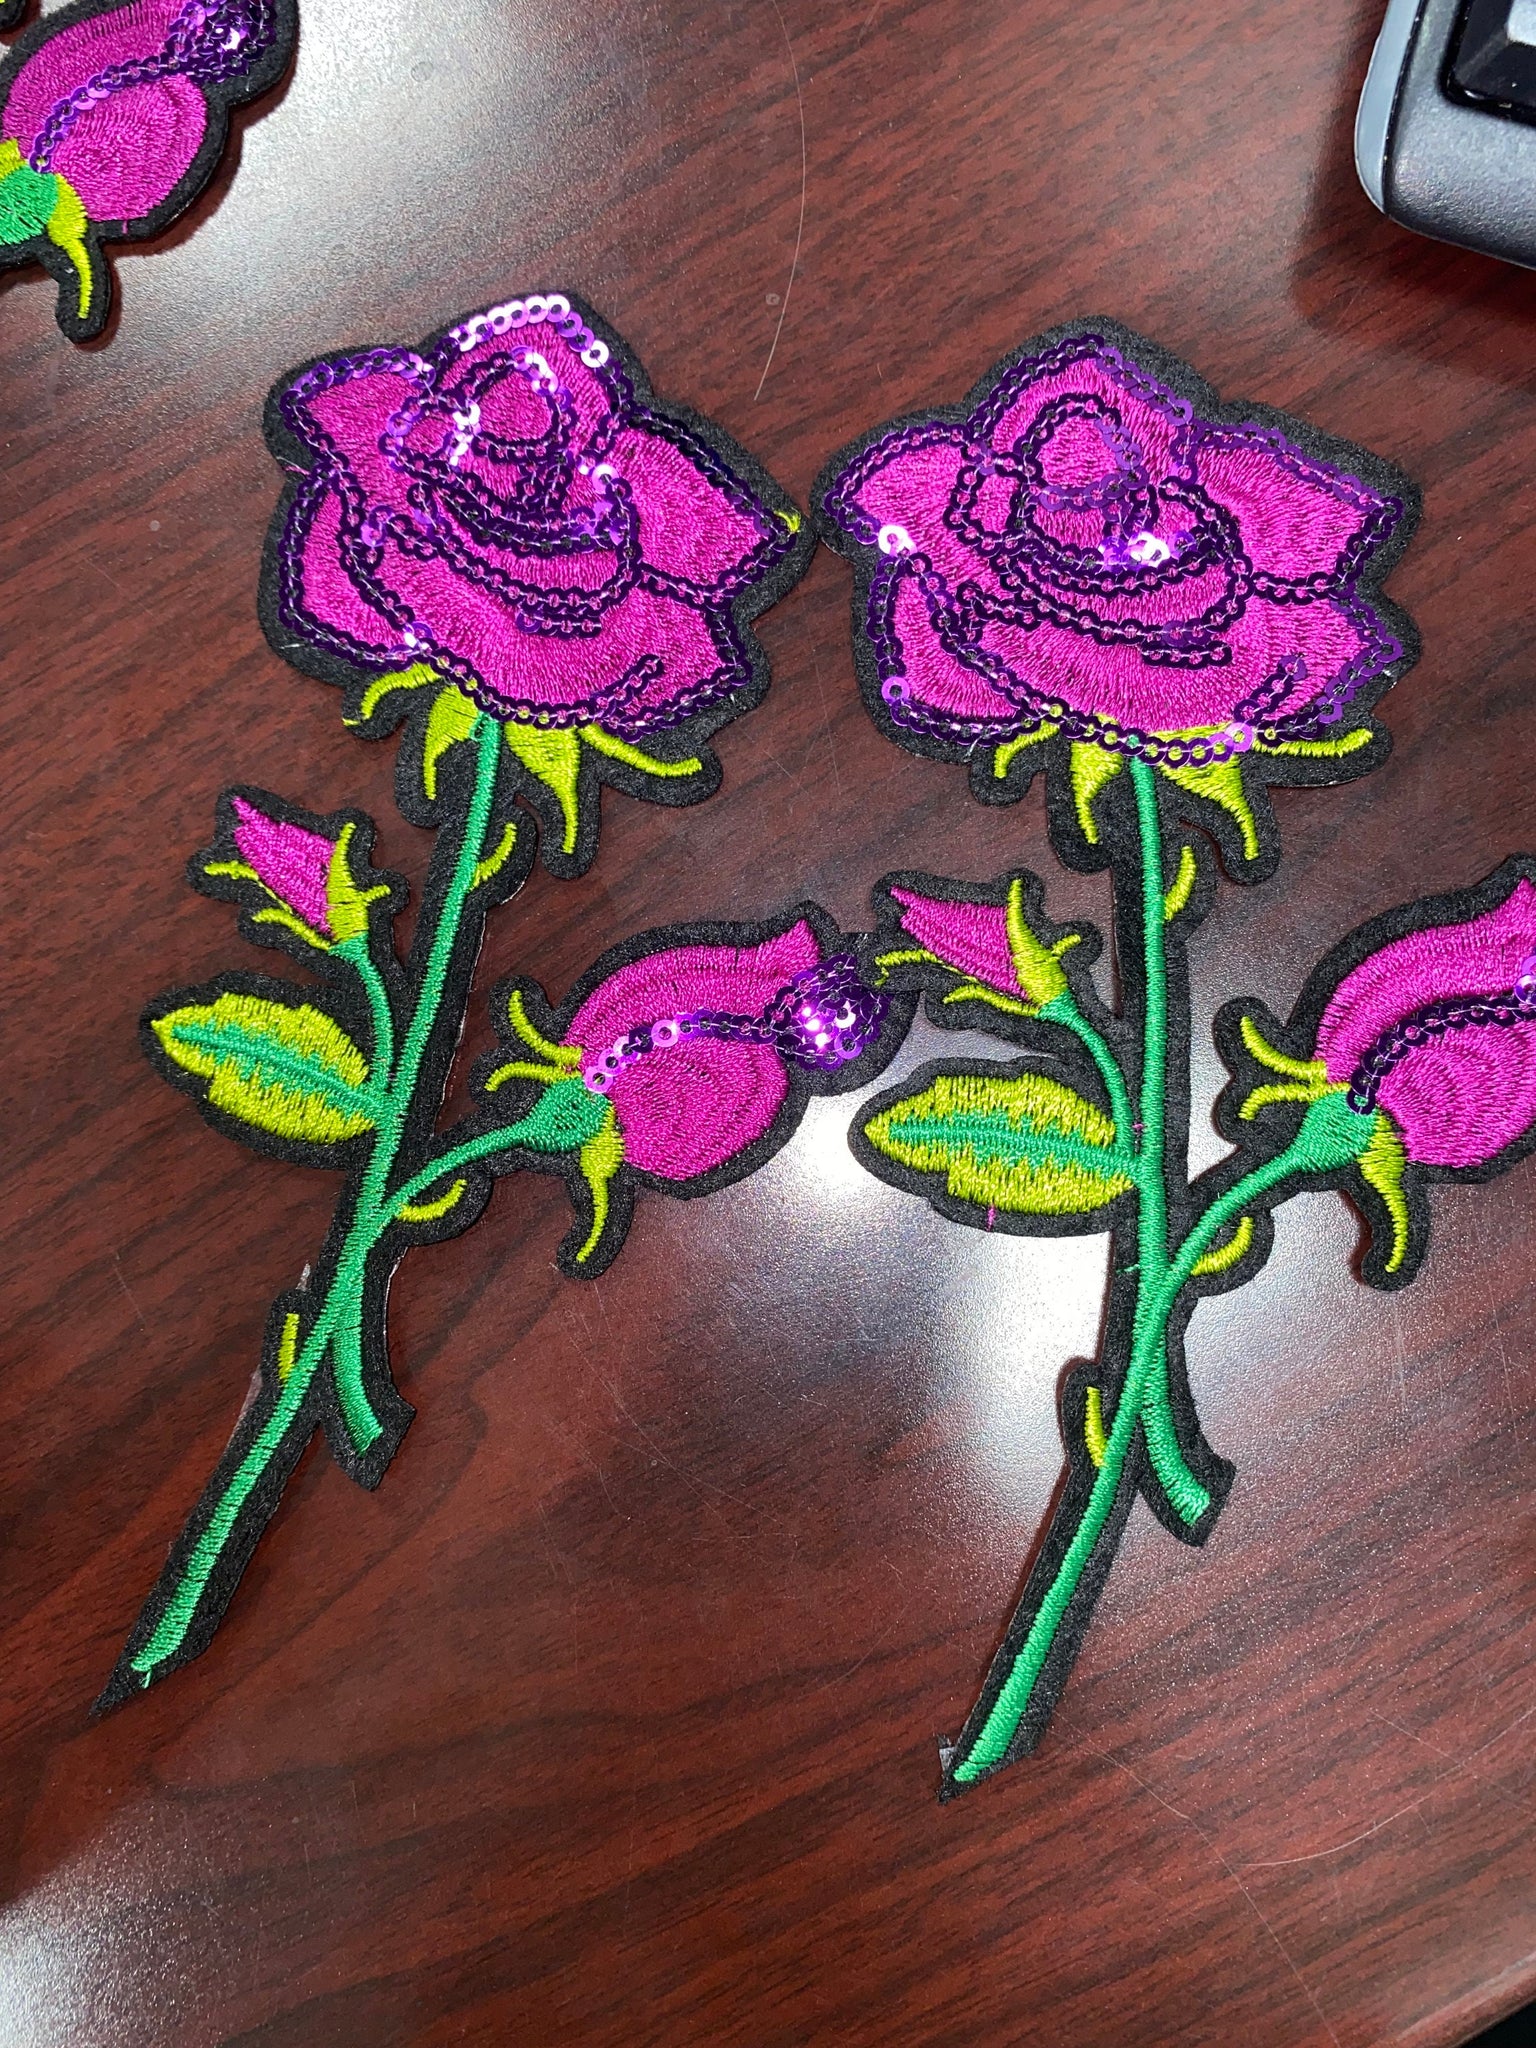 NEW Sequins Flowers, Adorable 2-pc set, PURPLE Roses (size 6-in), Matching Embroidered Iron-on Floral Patches, Small Patches for Clothing